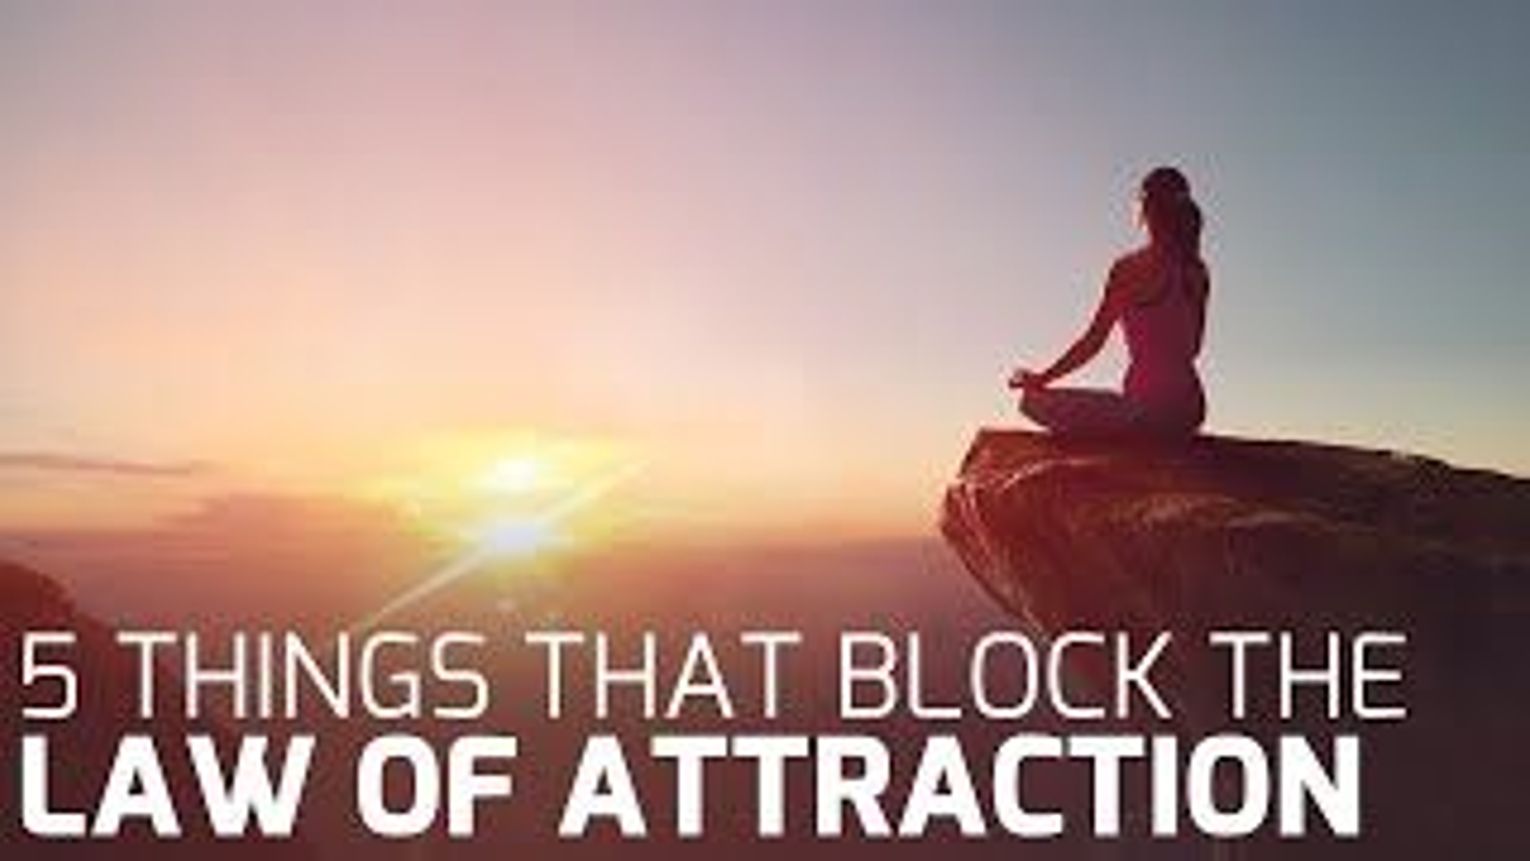 5 Things that Block the Law of Attraction